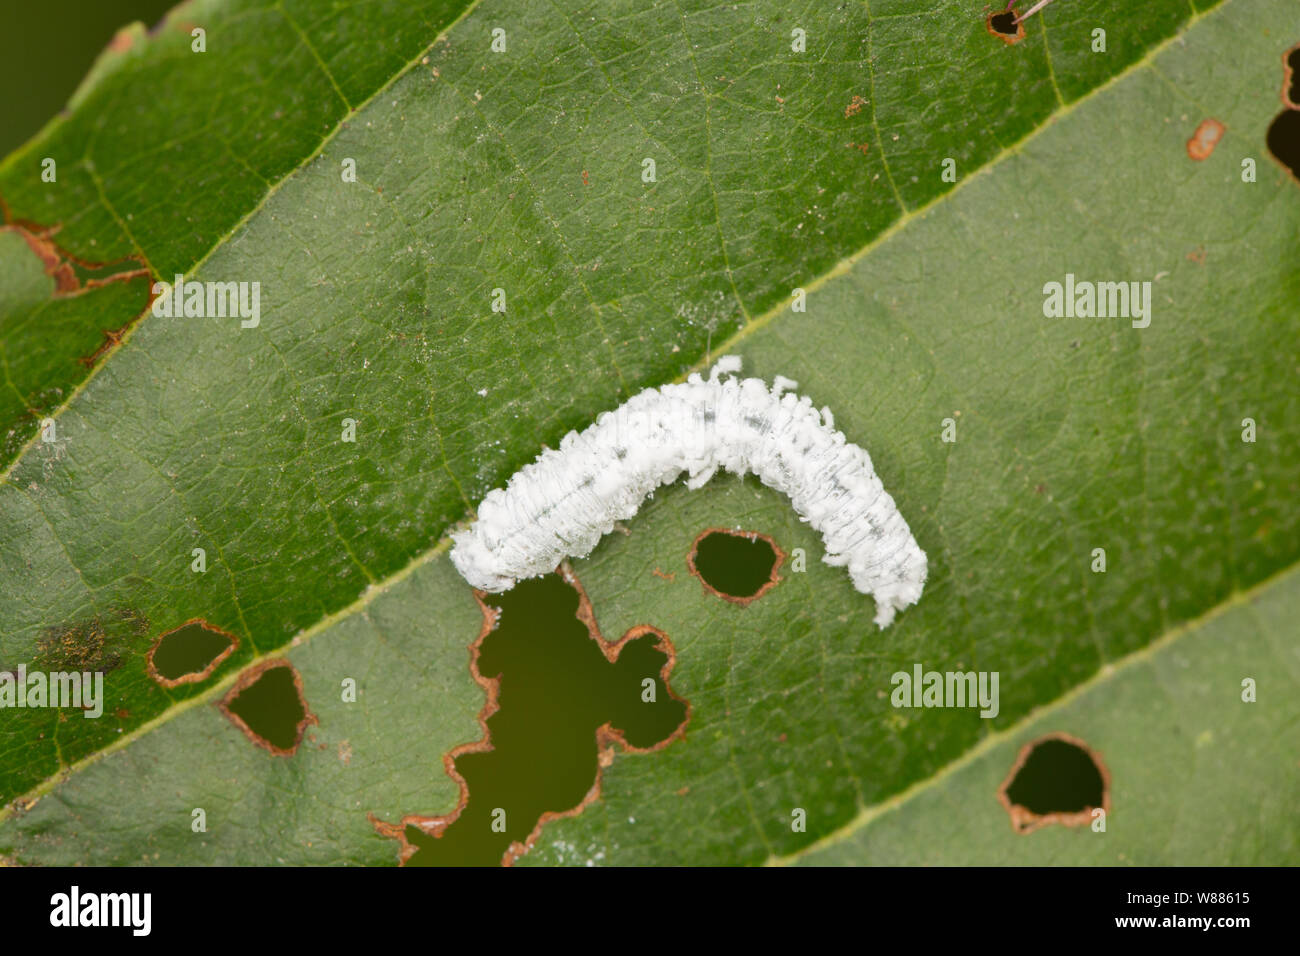 An example of the Alder Sawfly larva, Eriocampa ovata, photographed on an alder leaf, Alnus glutinosa. The larva was found on the banks of the Dorset Stock Photo